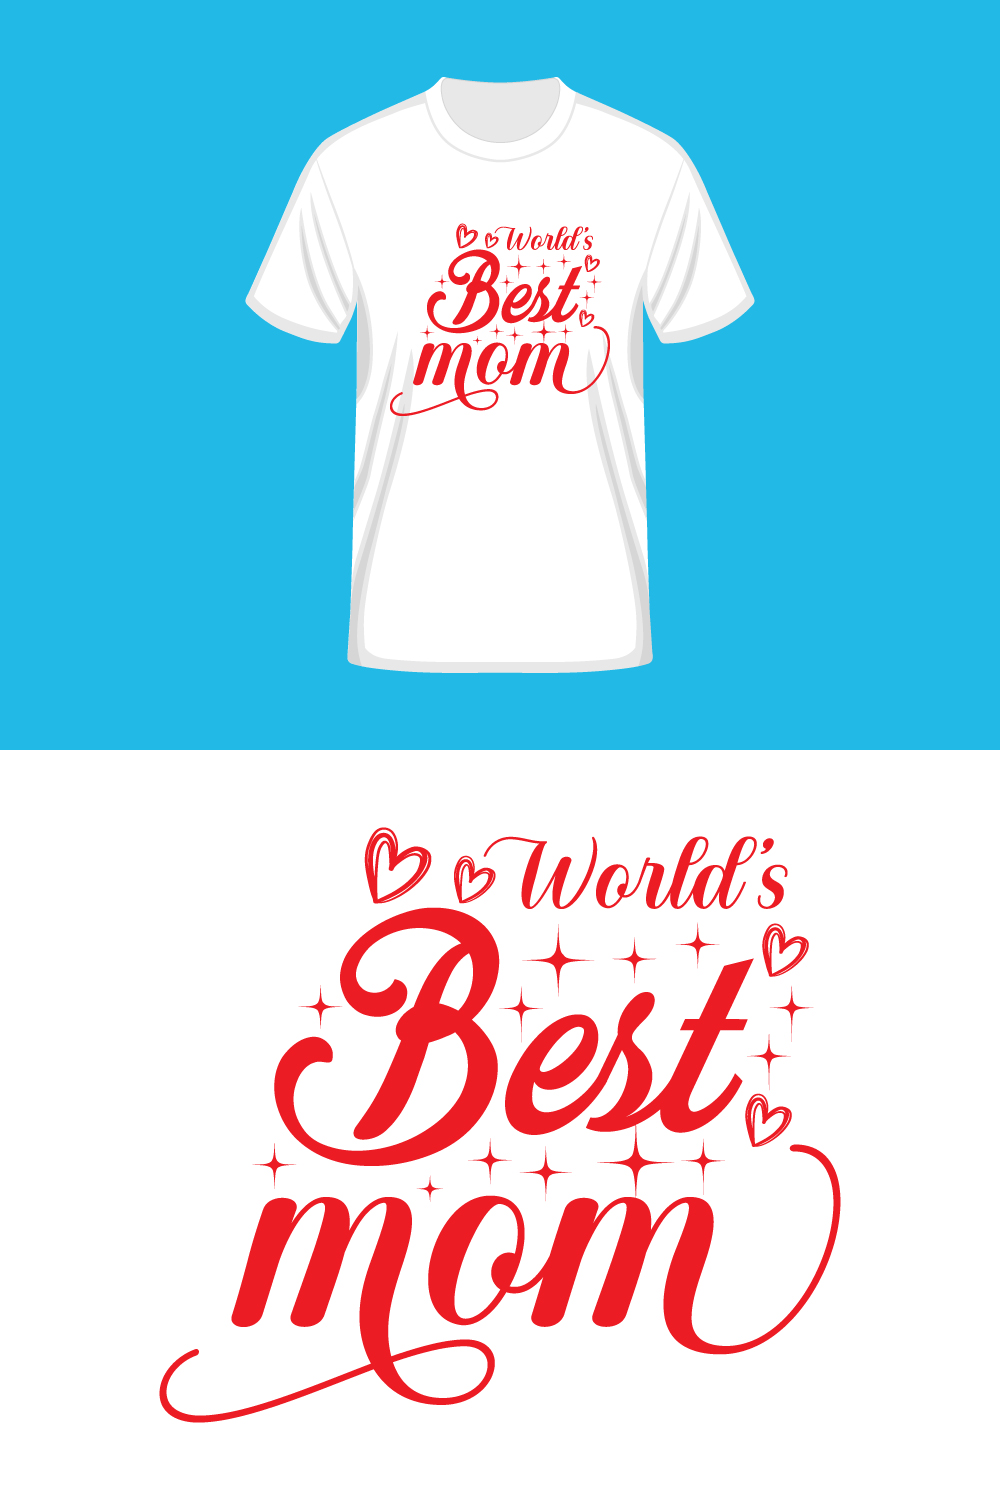 Mother's day t shirt that says 'you are the best mom' on it pinterest preview image.